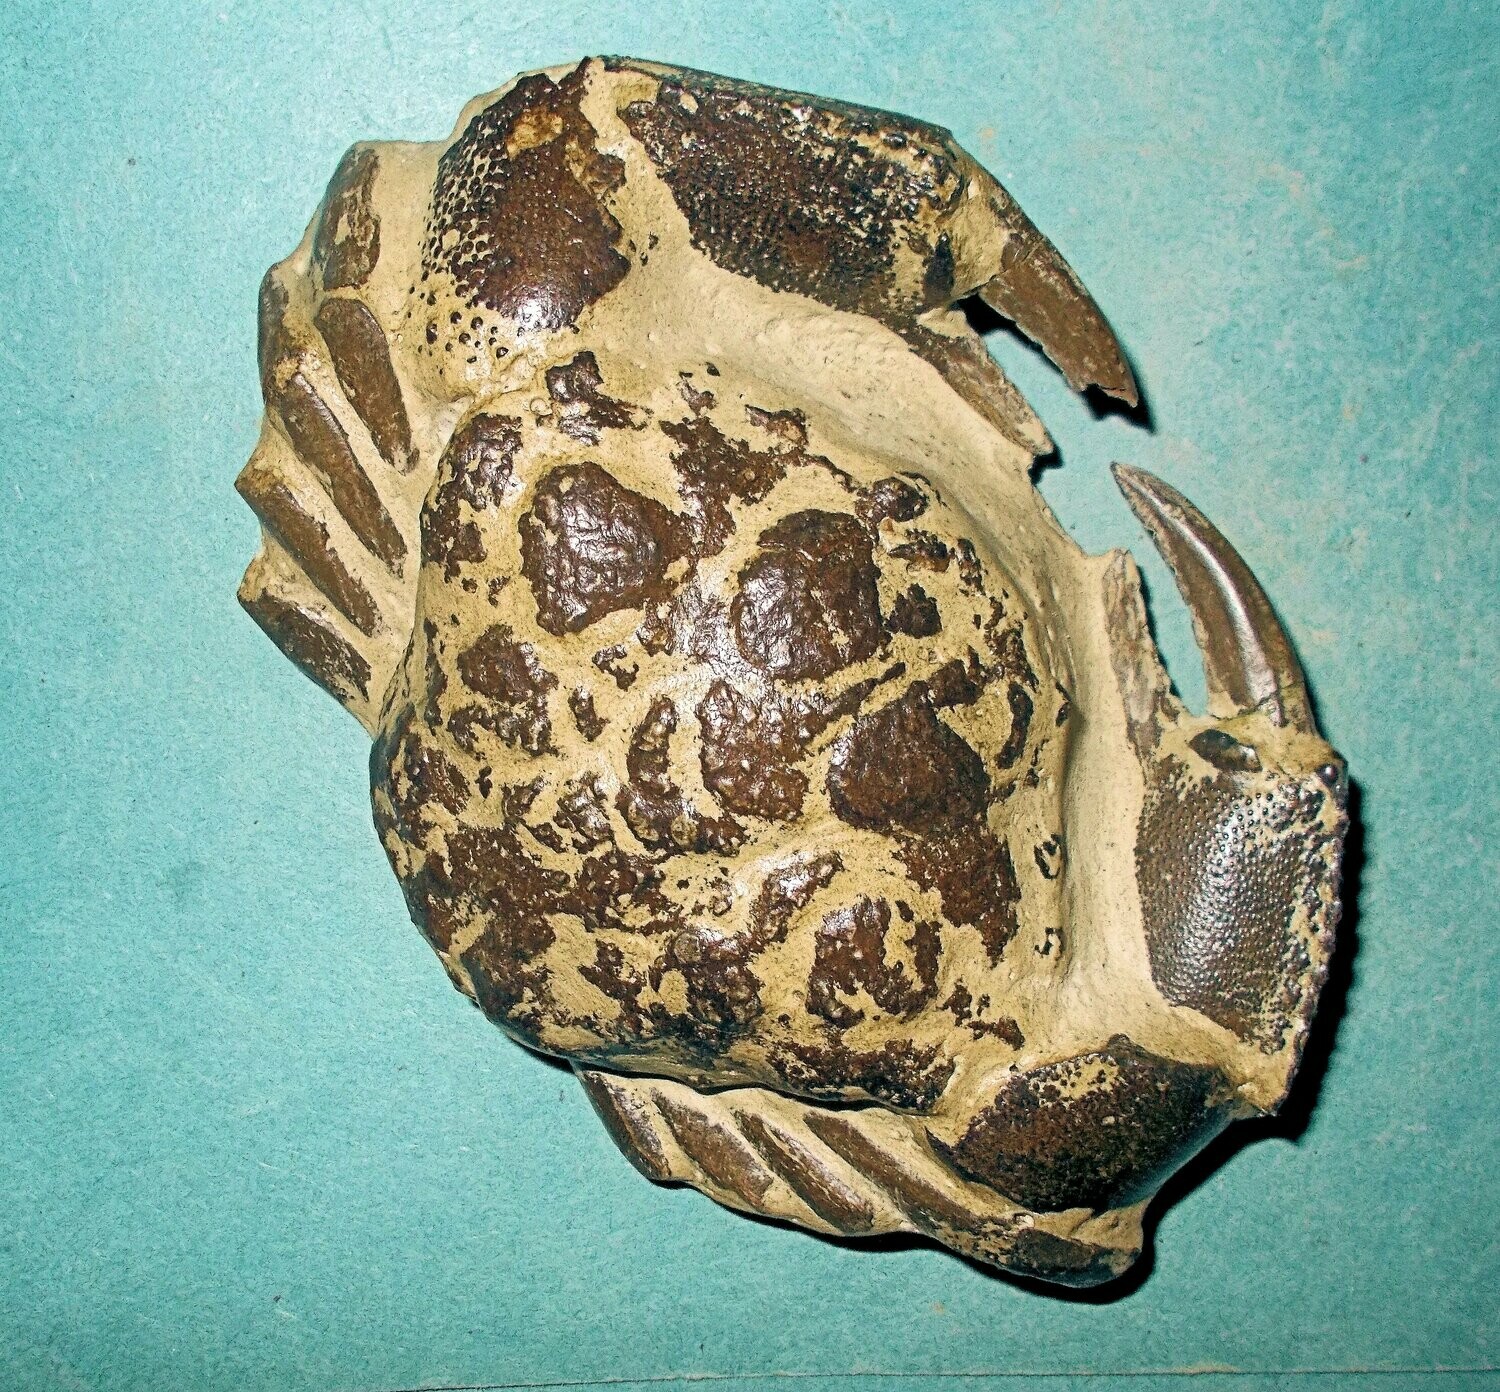 Beautiful near-complete 12cm crab: Decapoda sp. with fine claws: Miocene of Java, Indonesia.